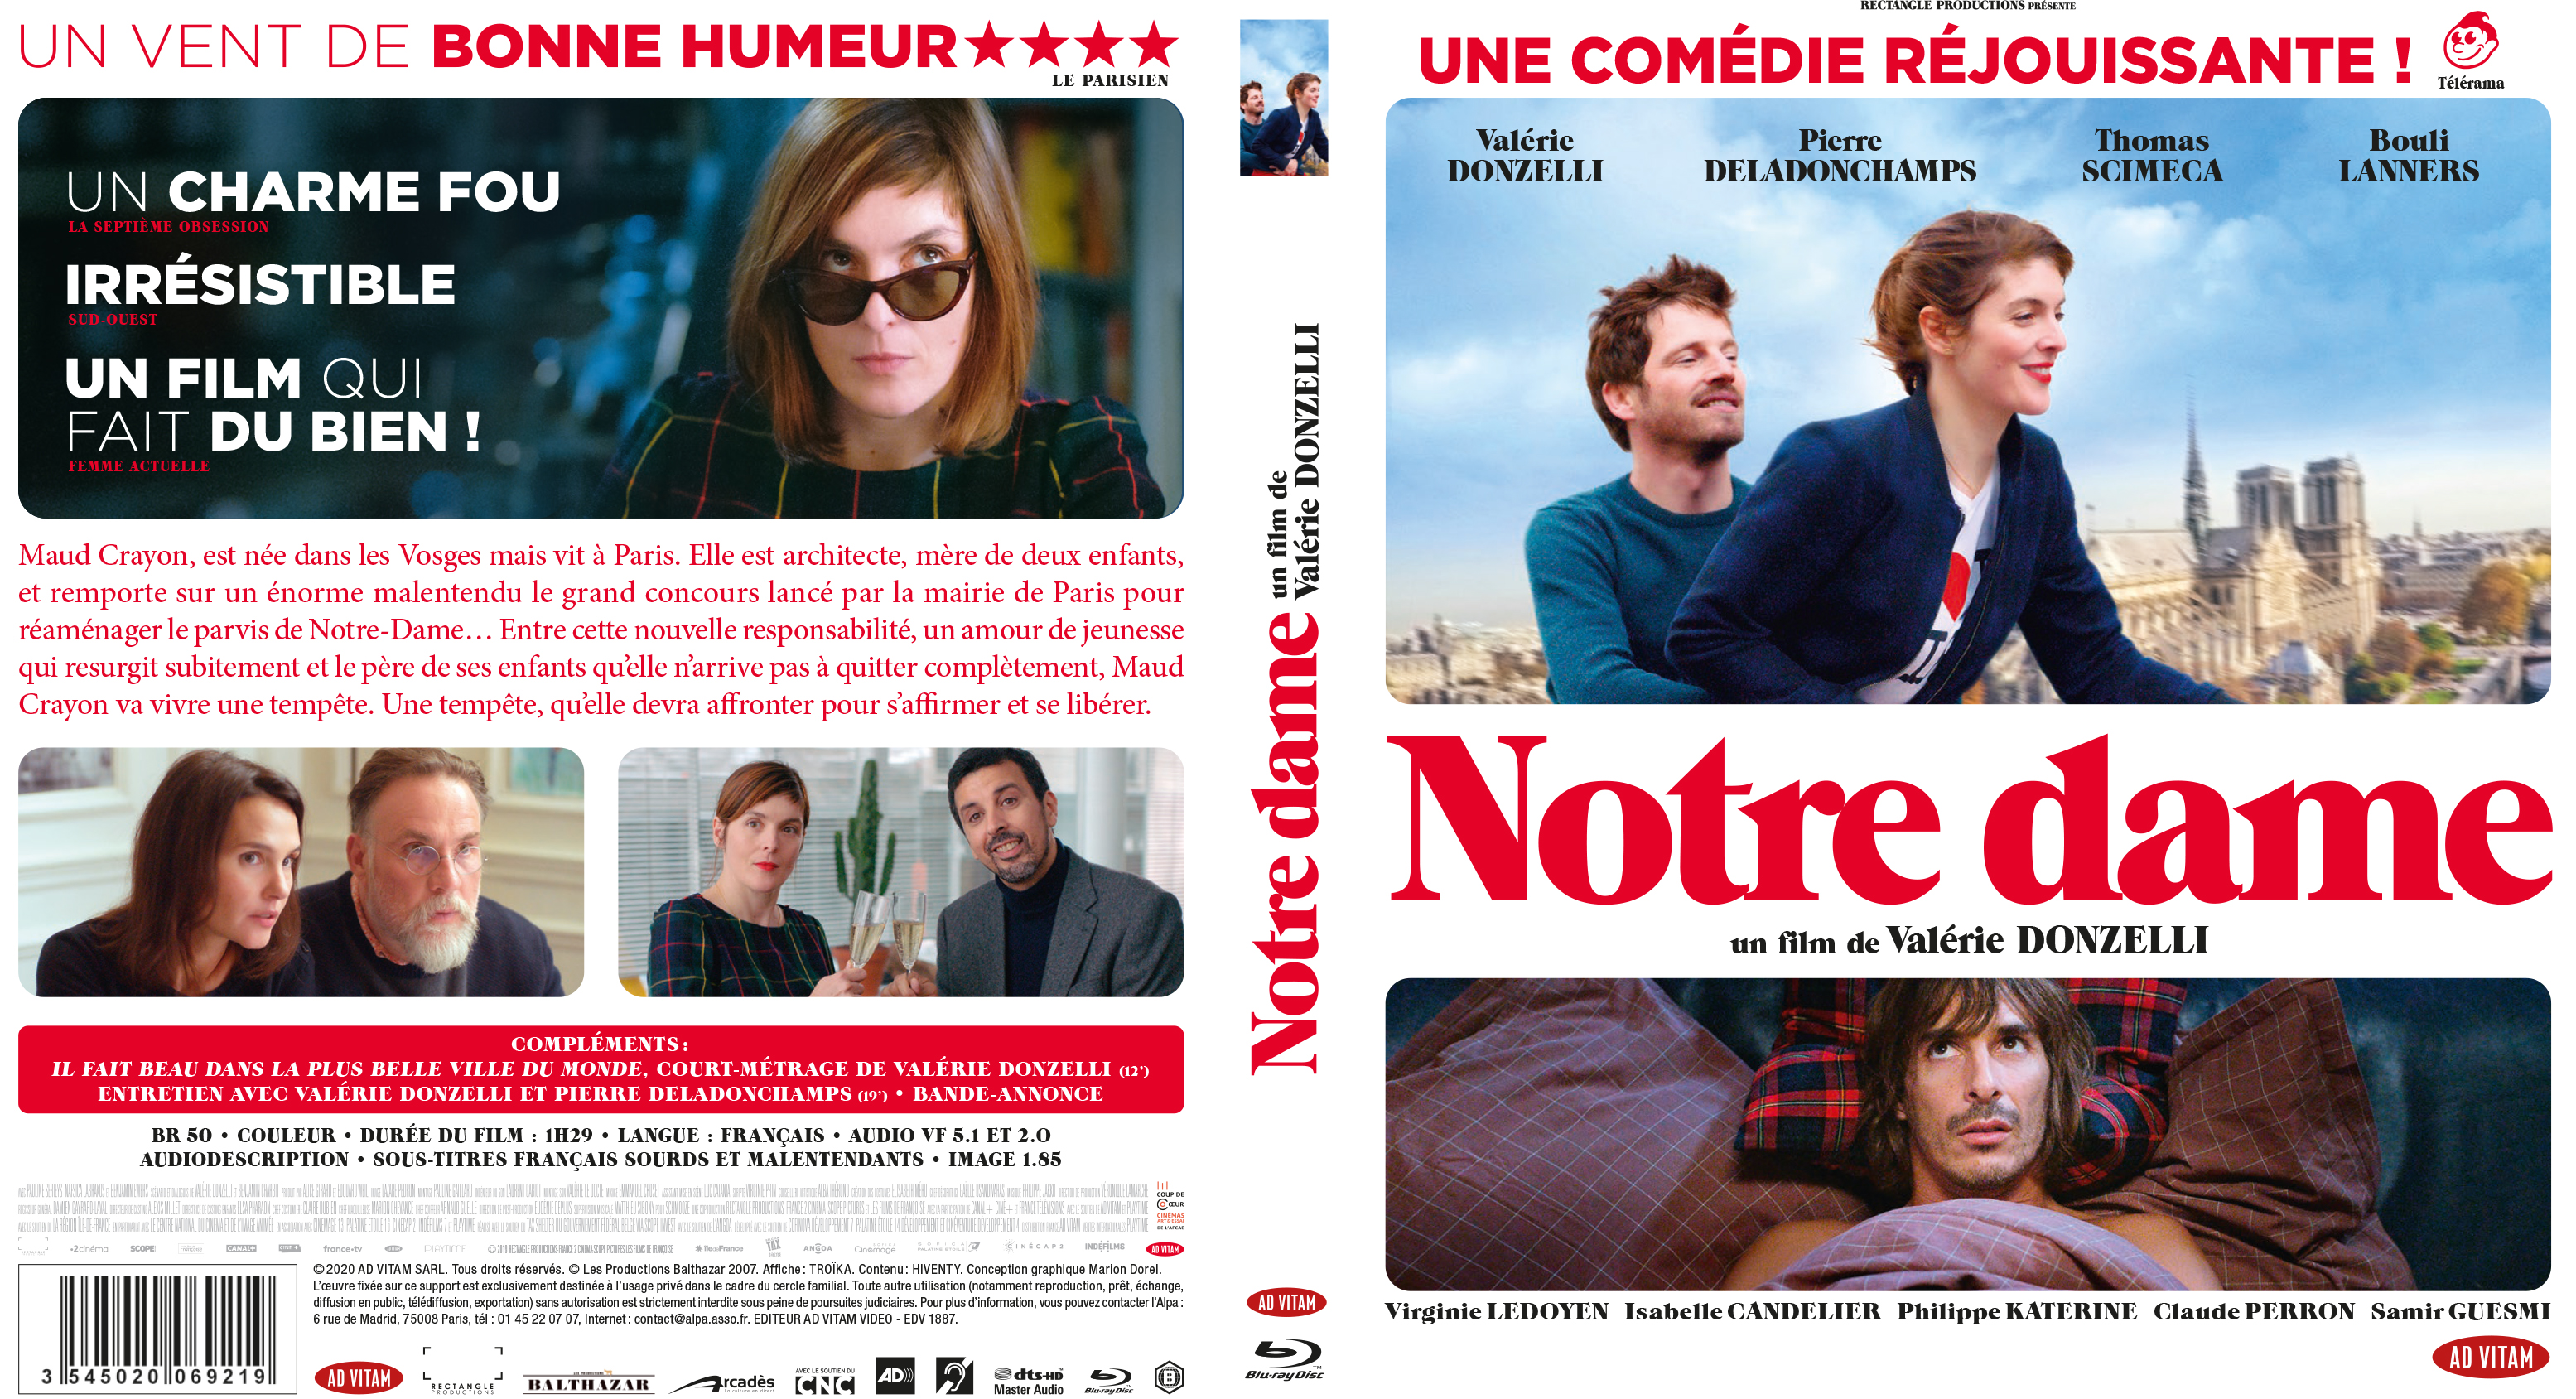 Jaquette DVD Notre dame (BLU-RAY)